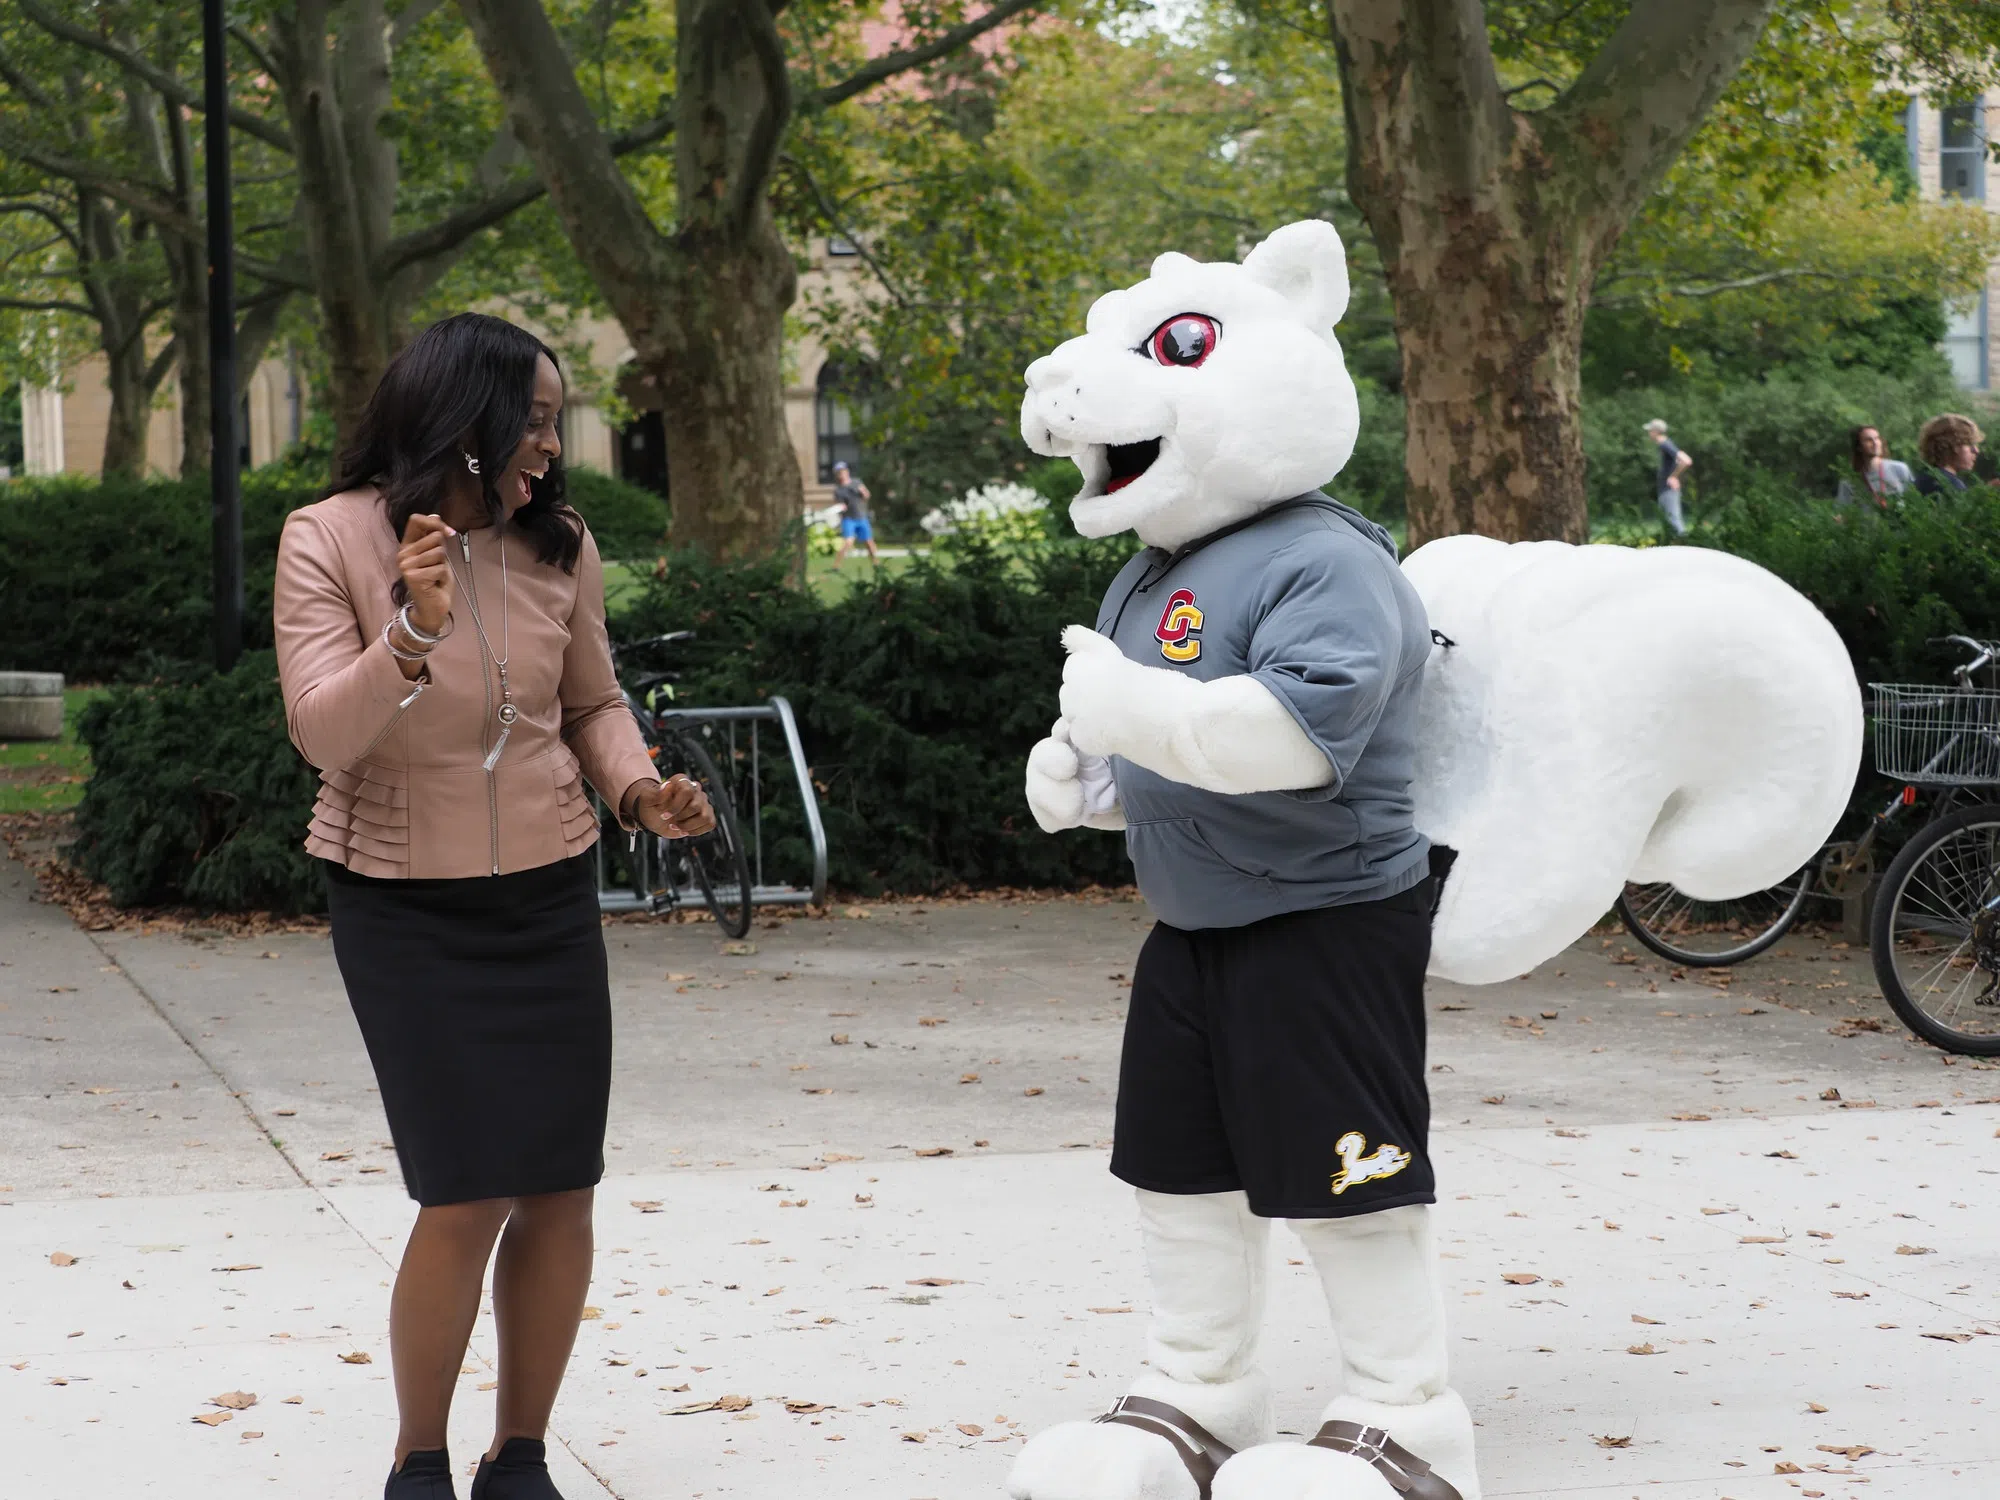 President Ambar and Oberlin's mascot, Yeobie the white squirrel, dance to music.